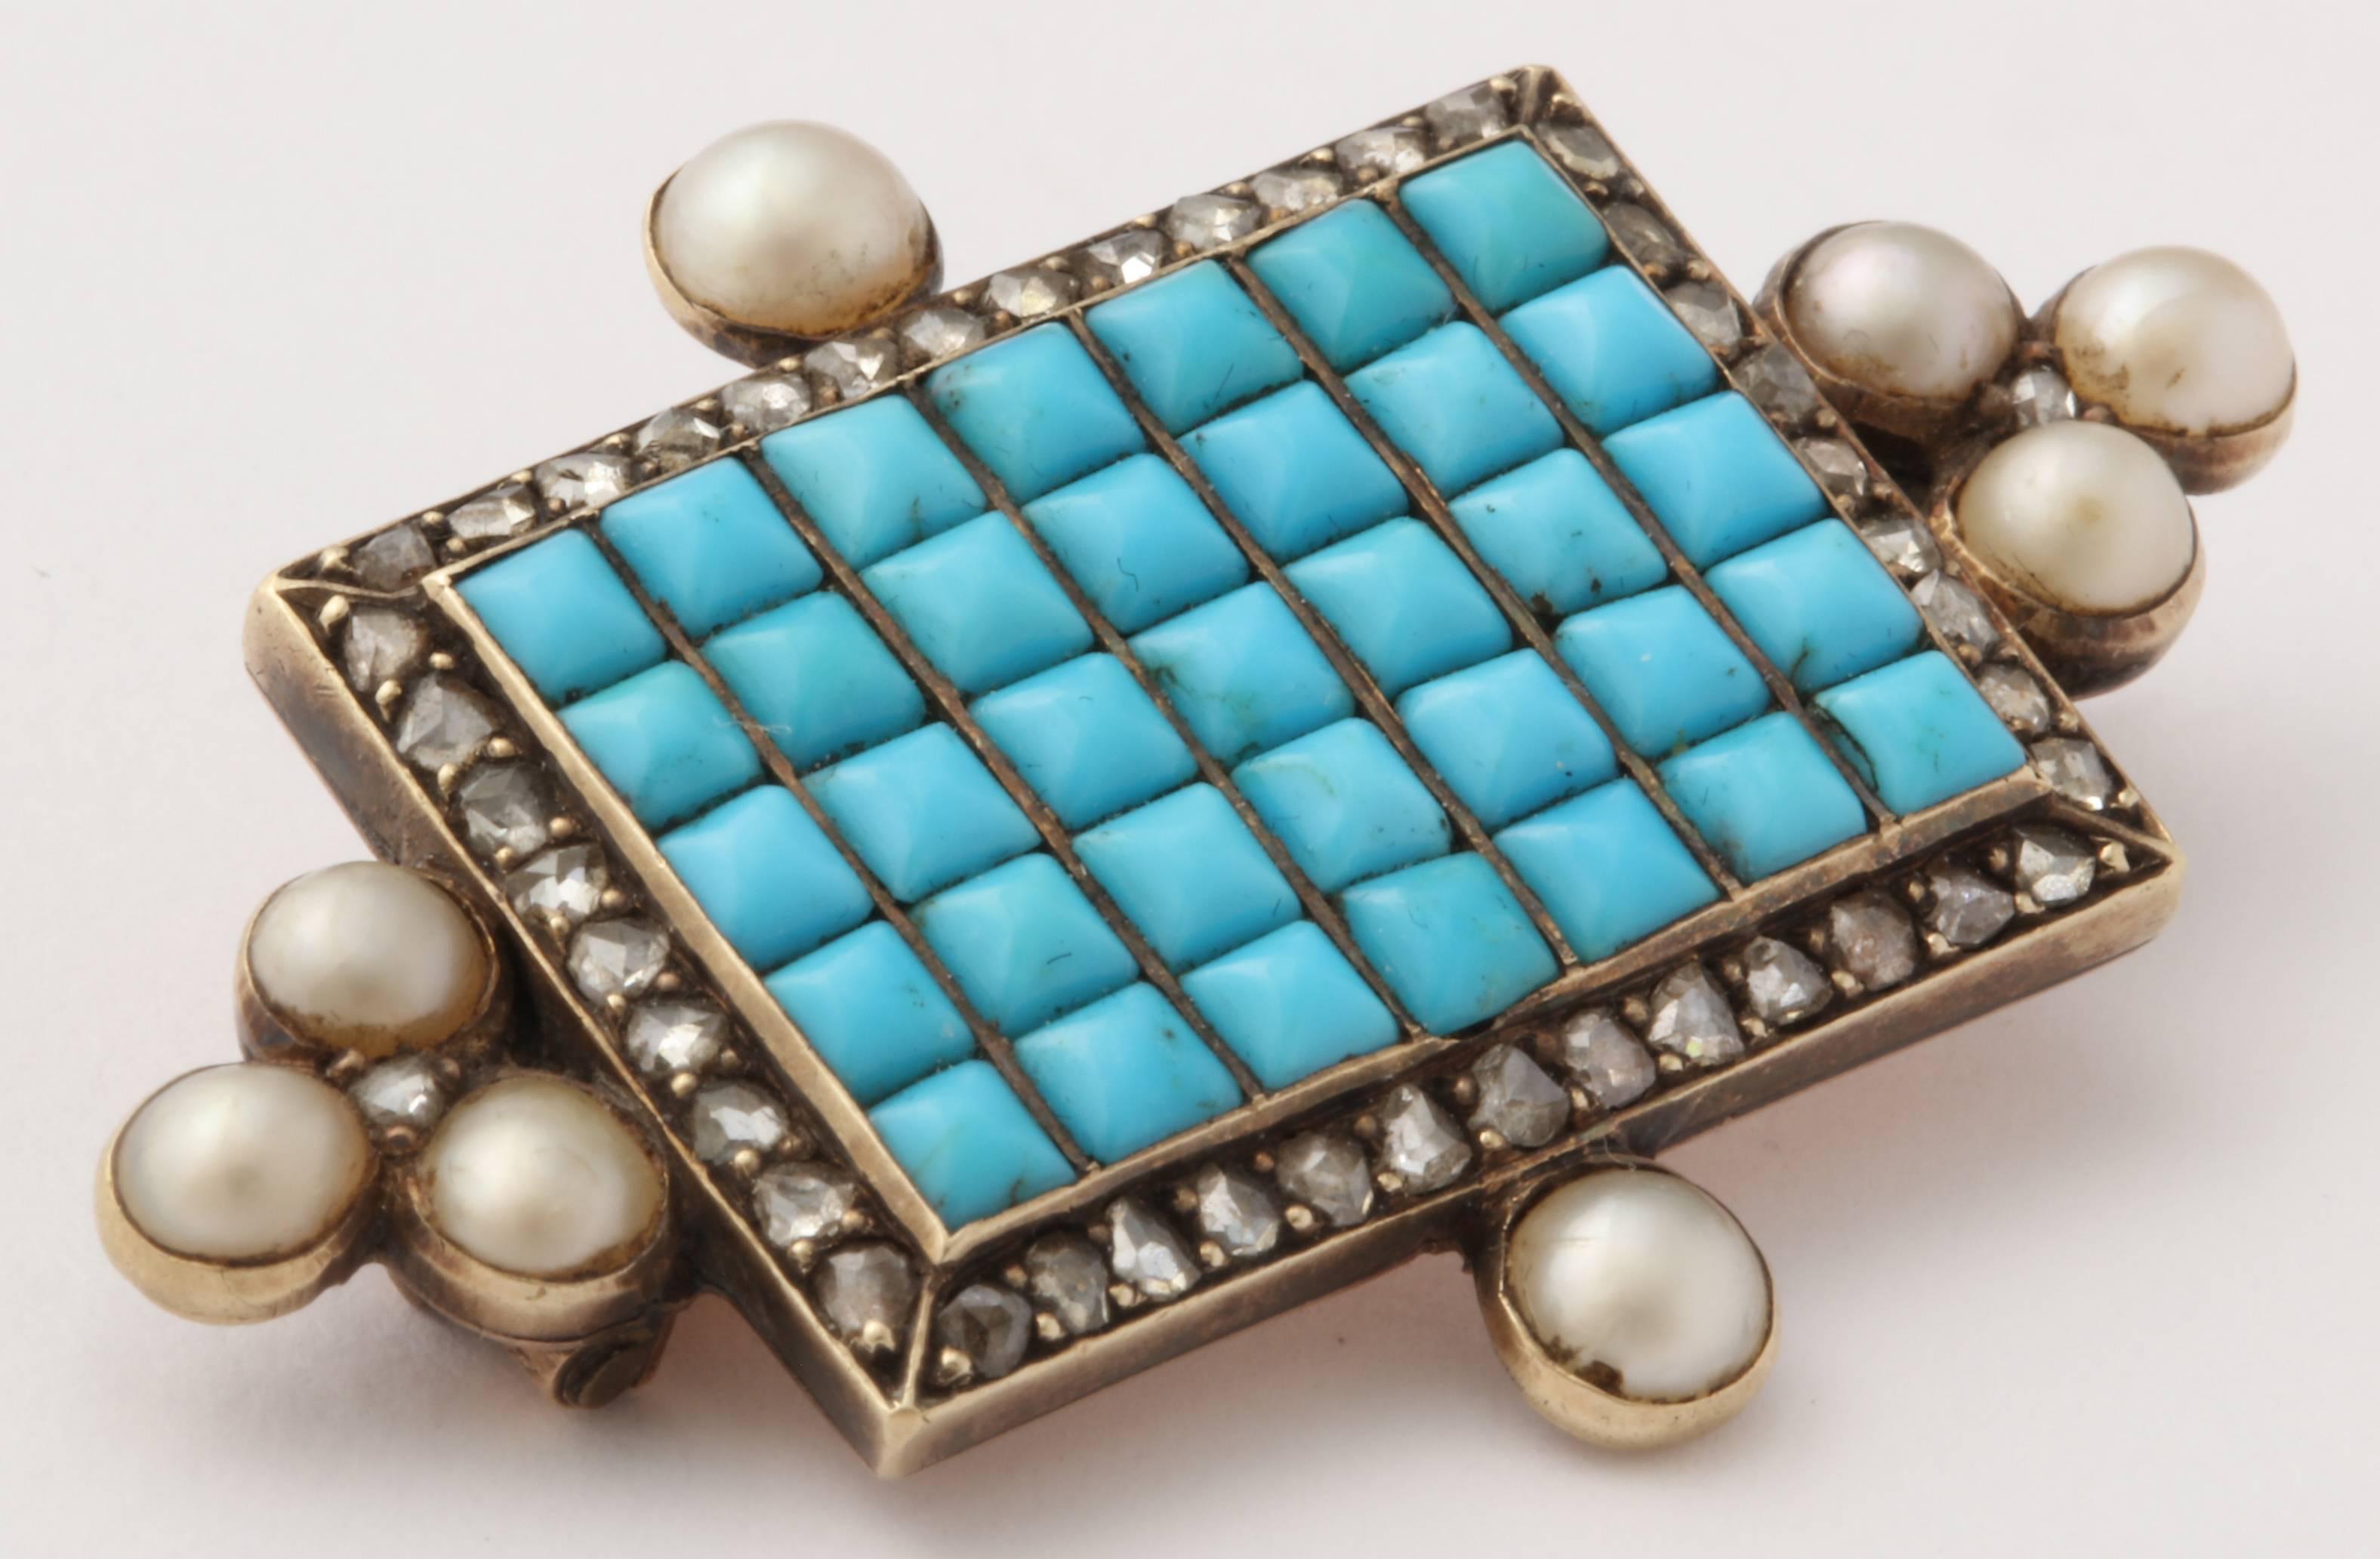 Perfectly matched Persian turquoise is set in the central rectangle surround by a row of rose cut diamonds. 8 natural pearls are set around the diamonds. Exquisite condition and a charming example of the quality of craftsmanship in the Victorian